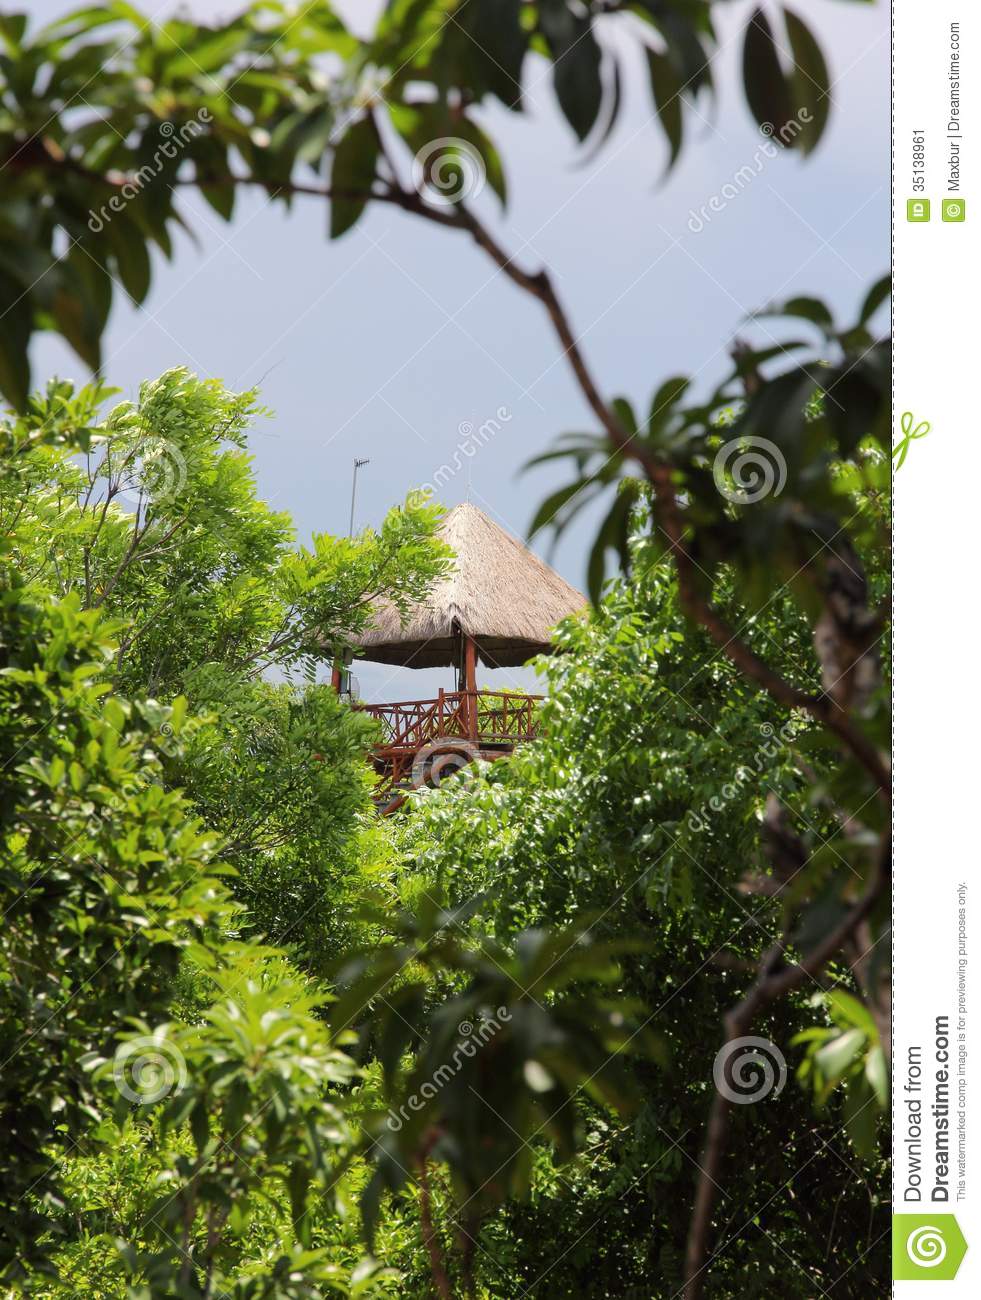 Viewing Tower In Tulum Stock Image   Image  35138961